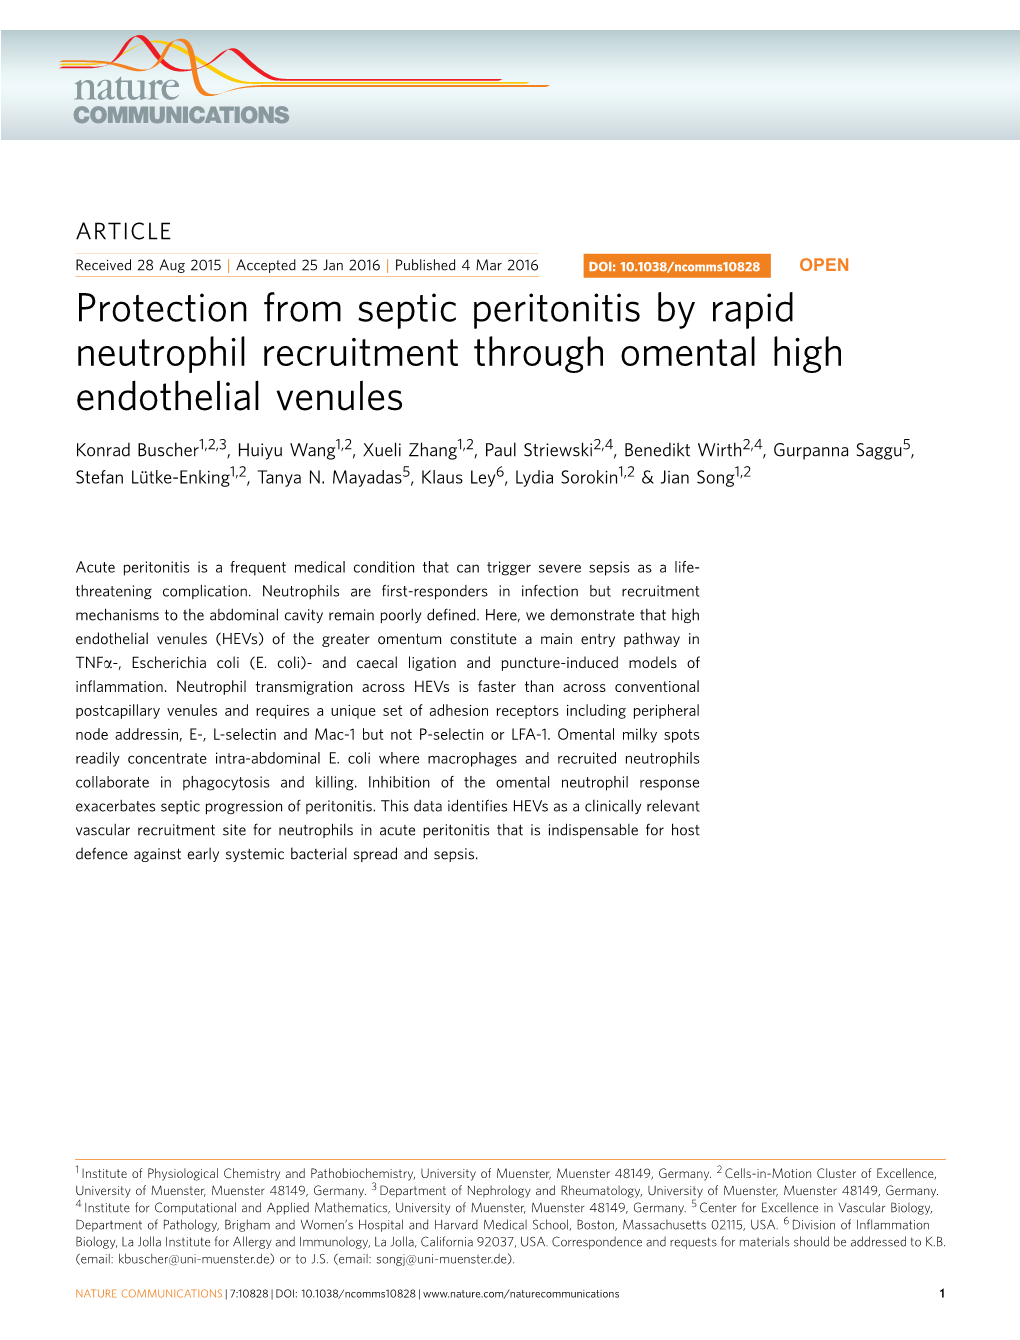 Protection from Septic Peritonitis by Rapid Neutrophil Recruitment Through Omental High Endothelial Venules